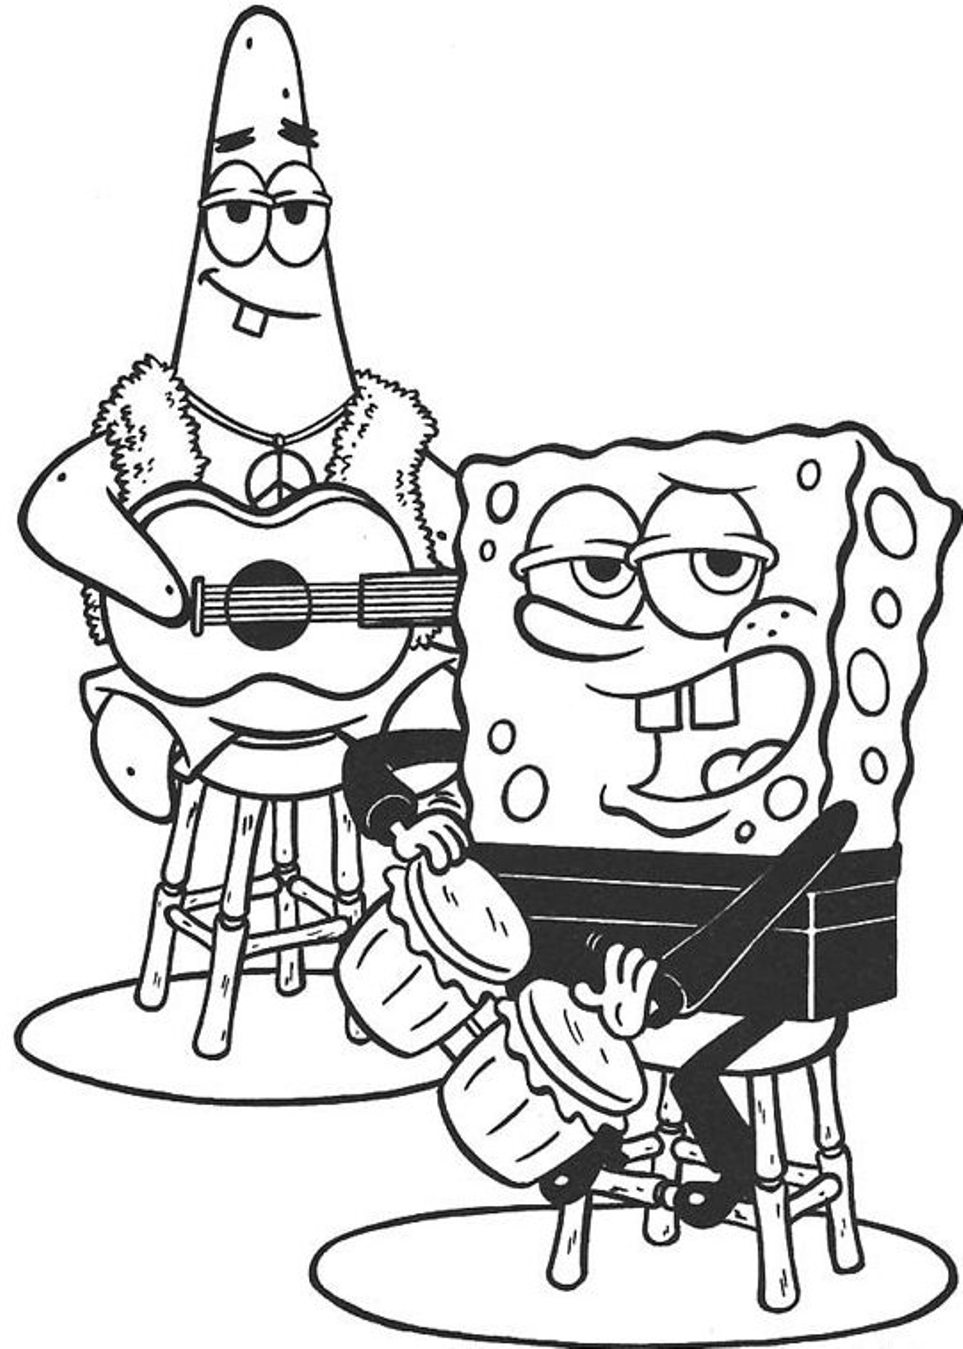 Playing Music Patrick And Spongebob S Free Coloring Page